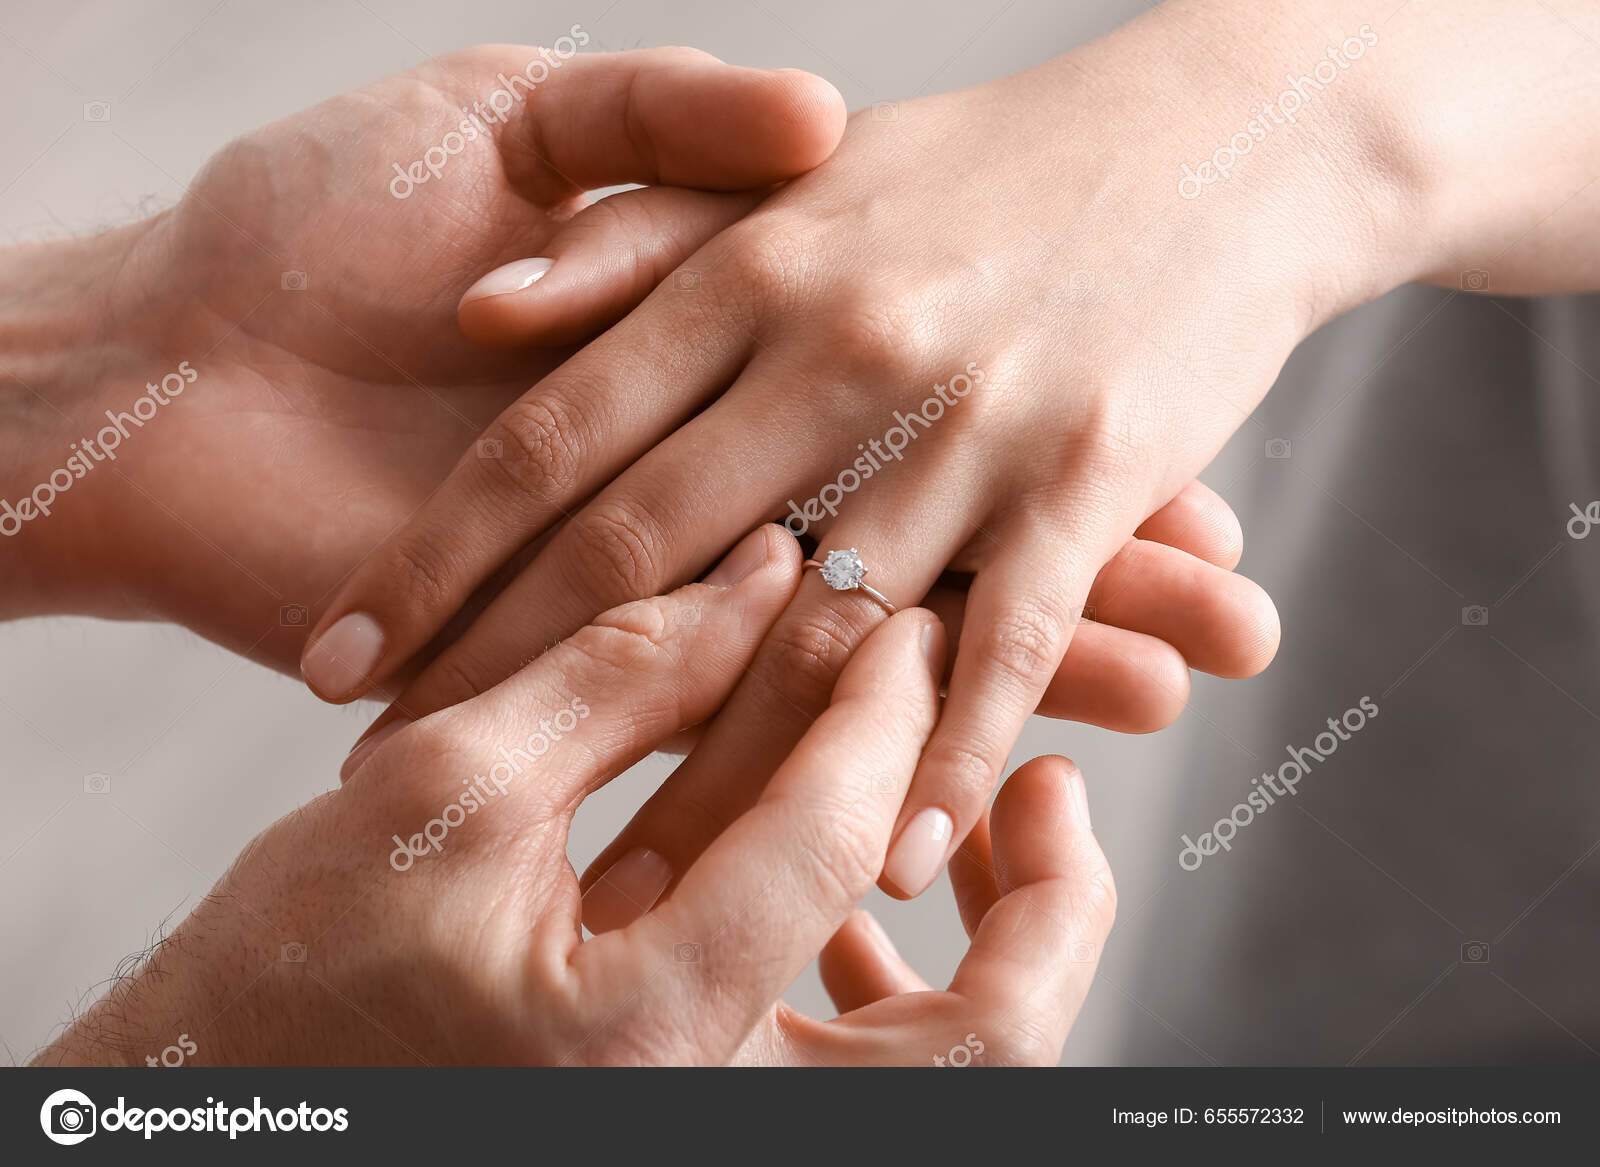 A Trace From The Wedding Ring On The Ring Finger. Female Hand Shows The  Trace Of The Engagement Ring. Stock Photo, Picture and Royalty Free Image.  Image 146077730.